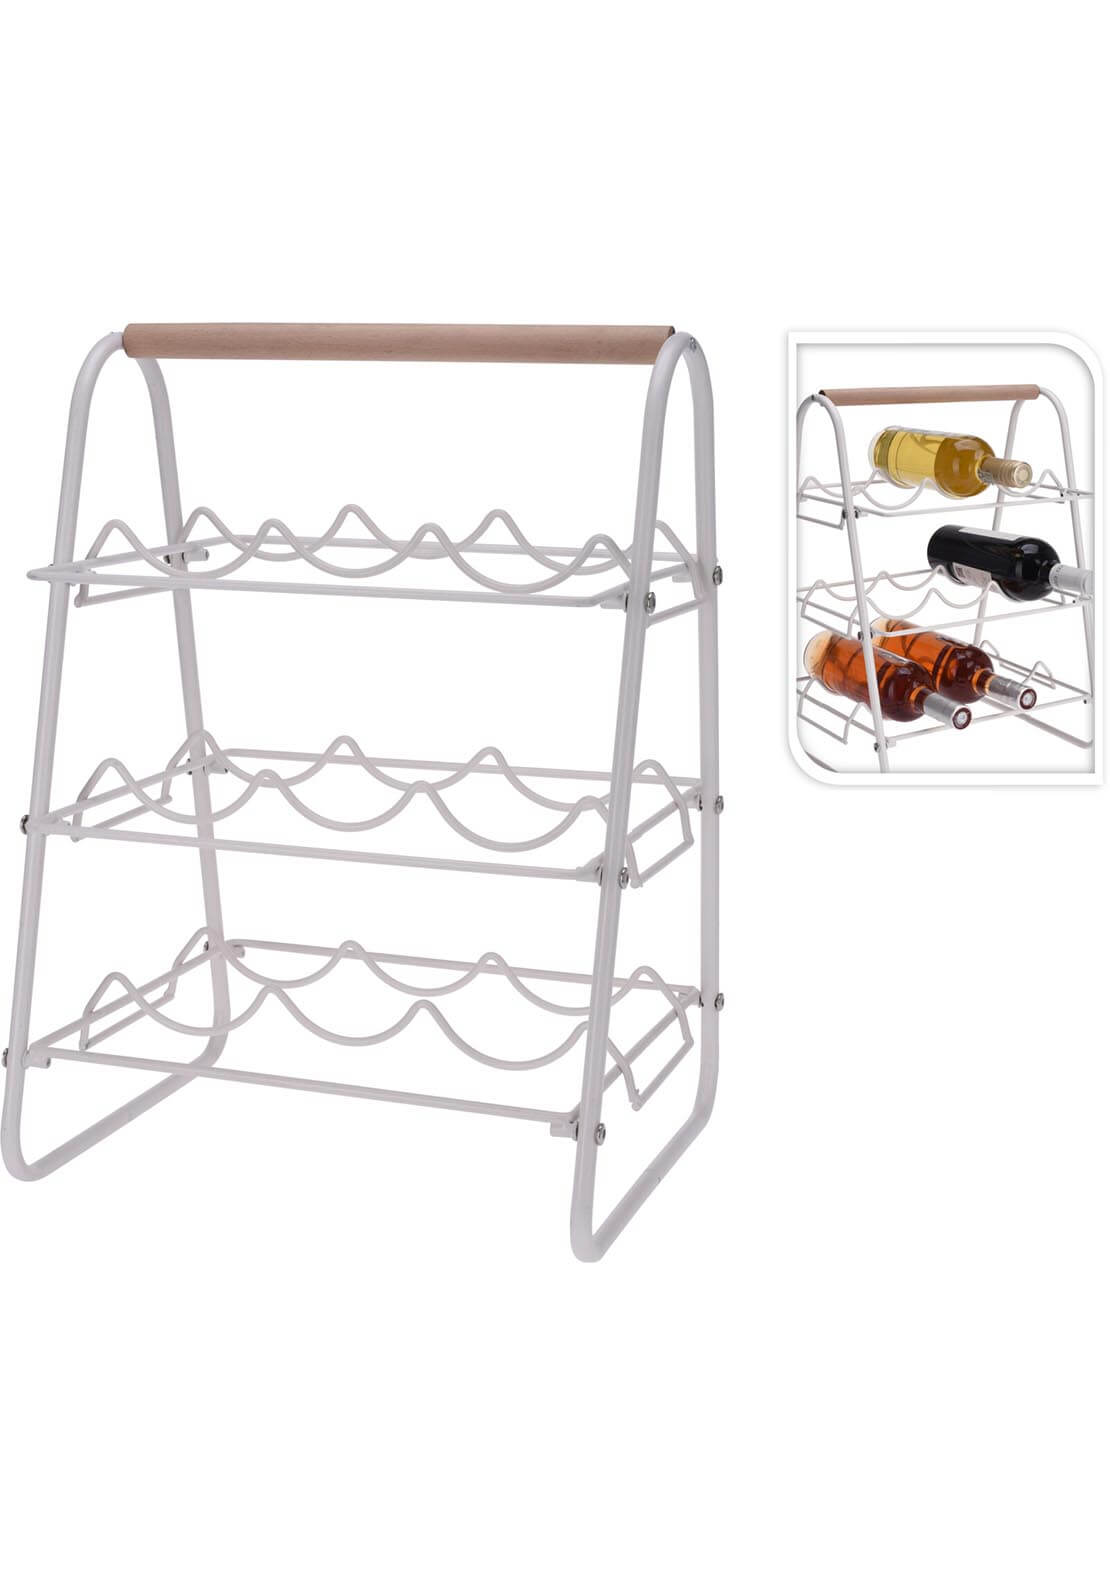 The Home Kitchen 9 Bottle Metal Wine Rack 1 Shaws Department Stores